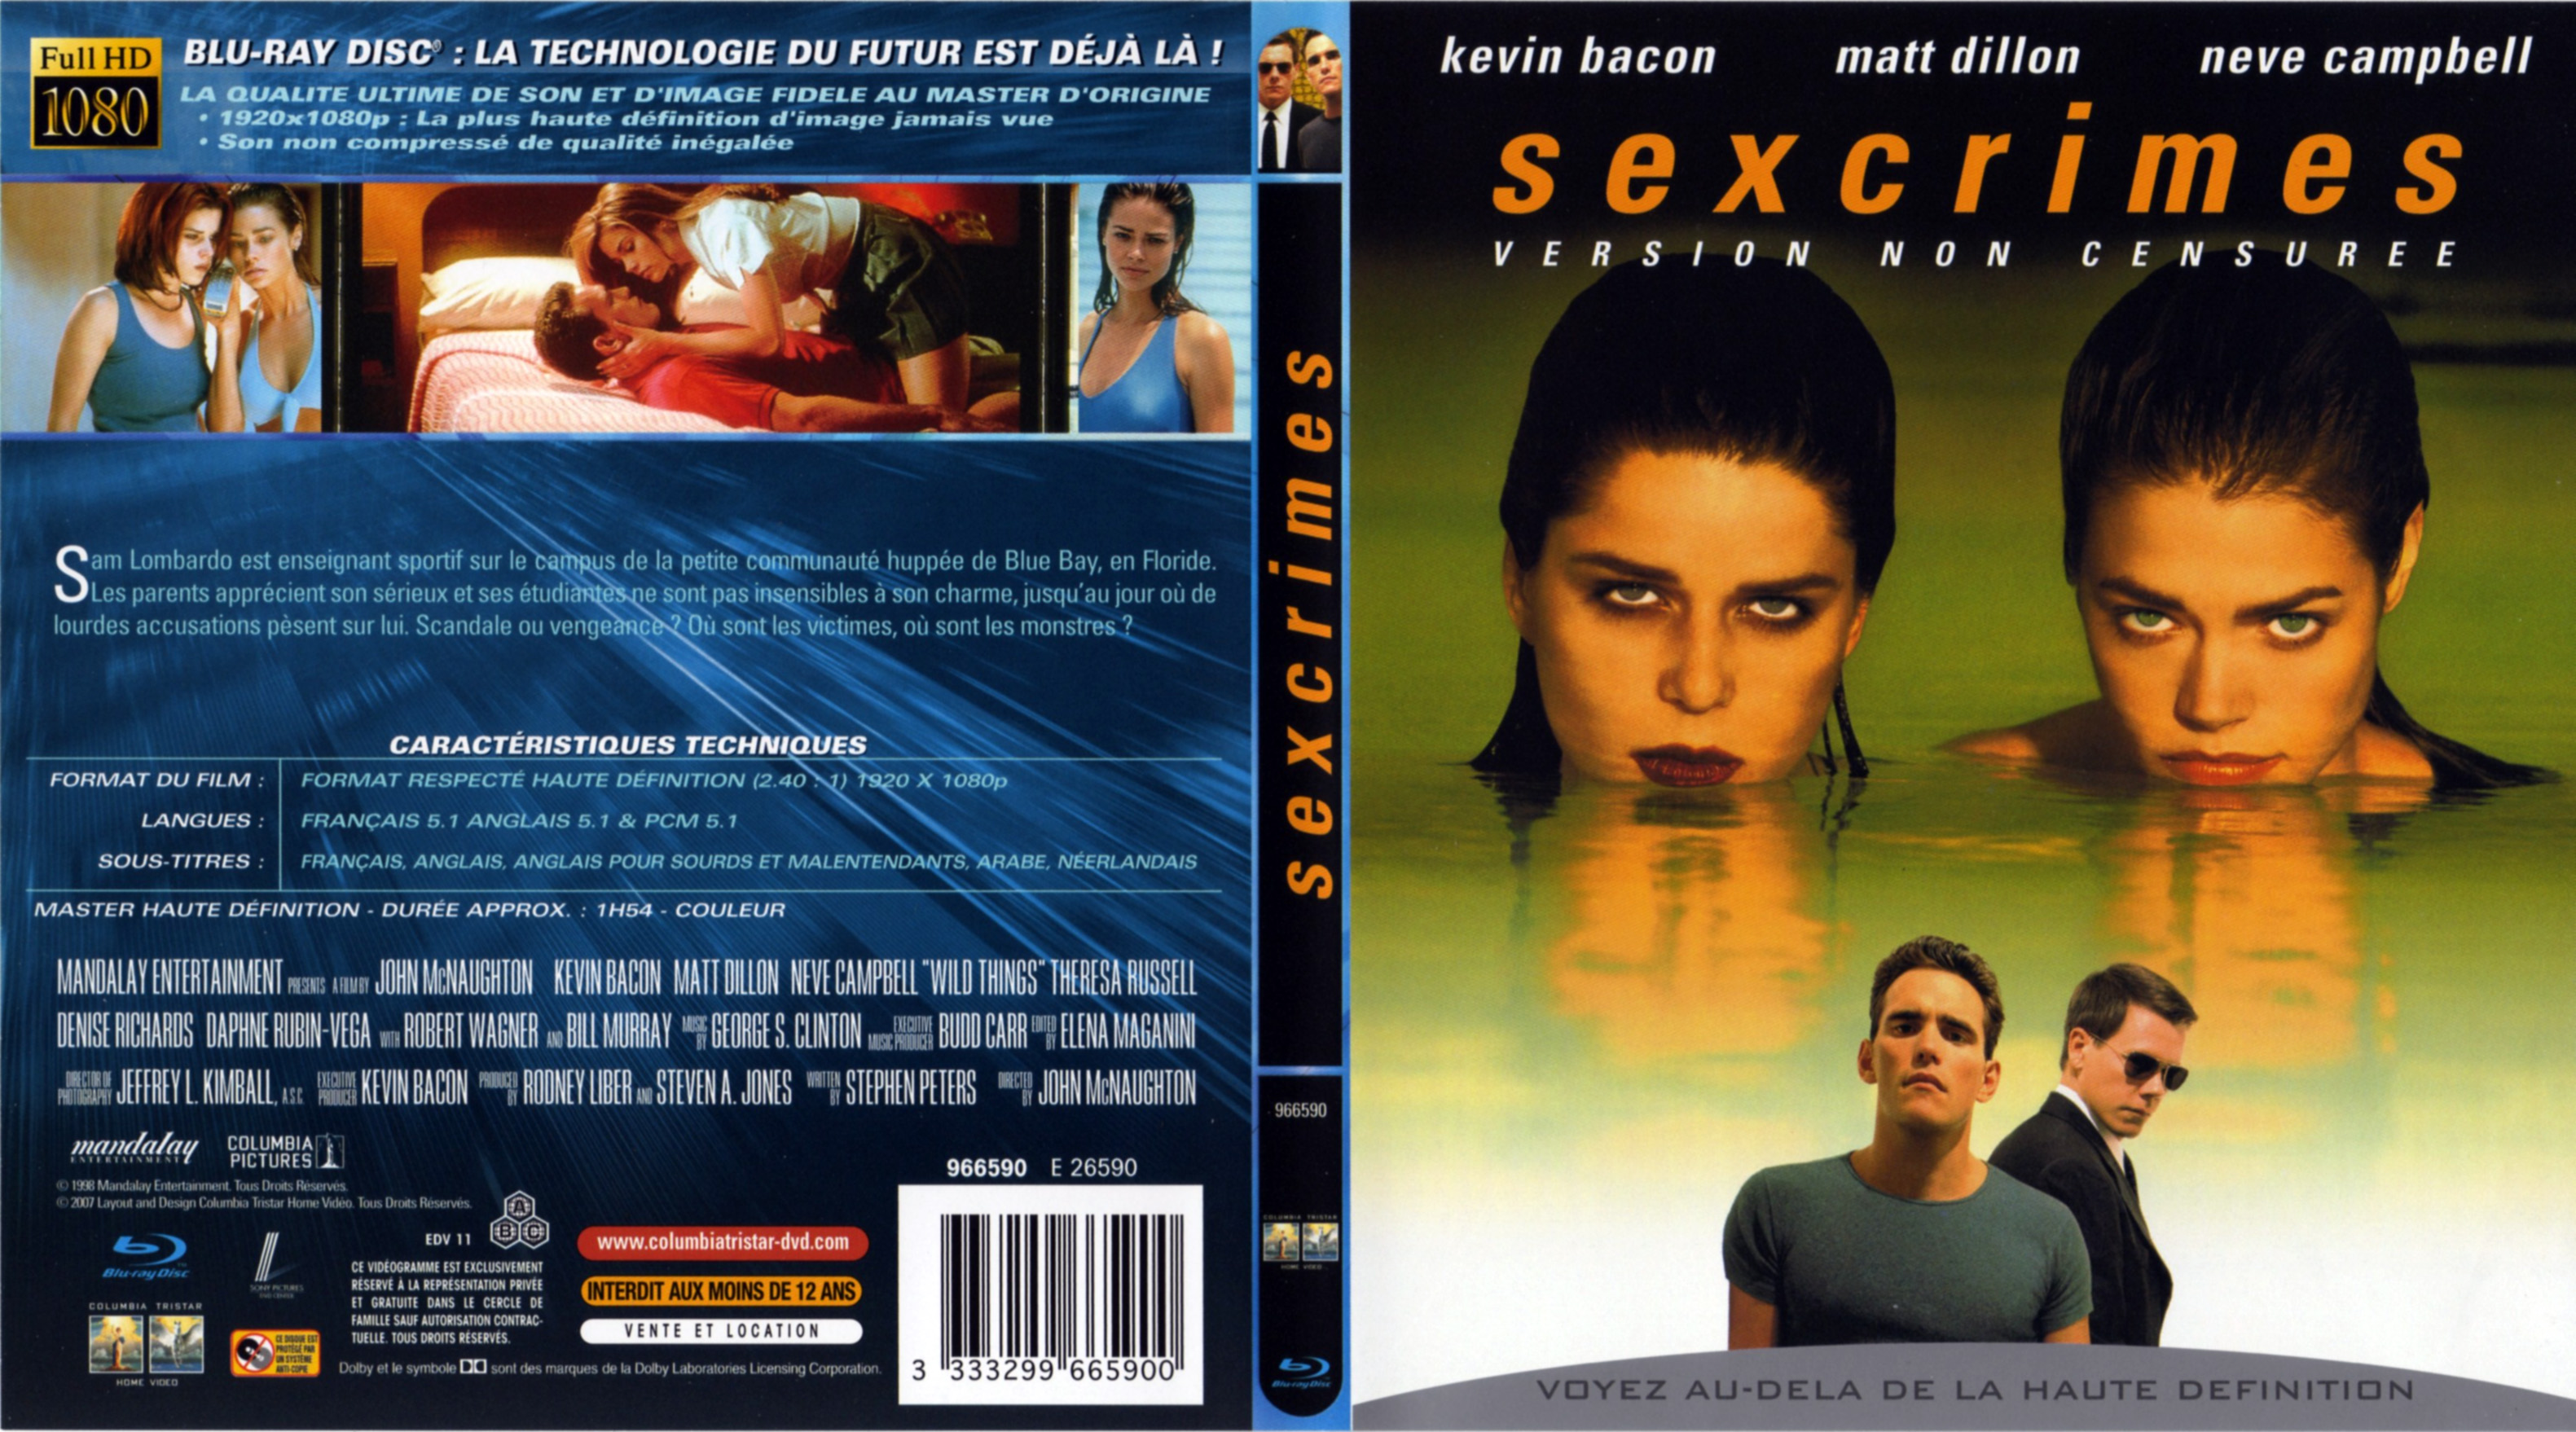 Jaquette DVD Sexcrimes (BLU-RAY)